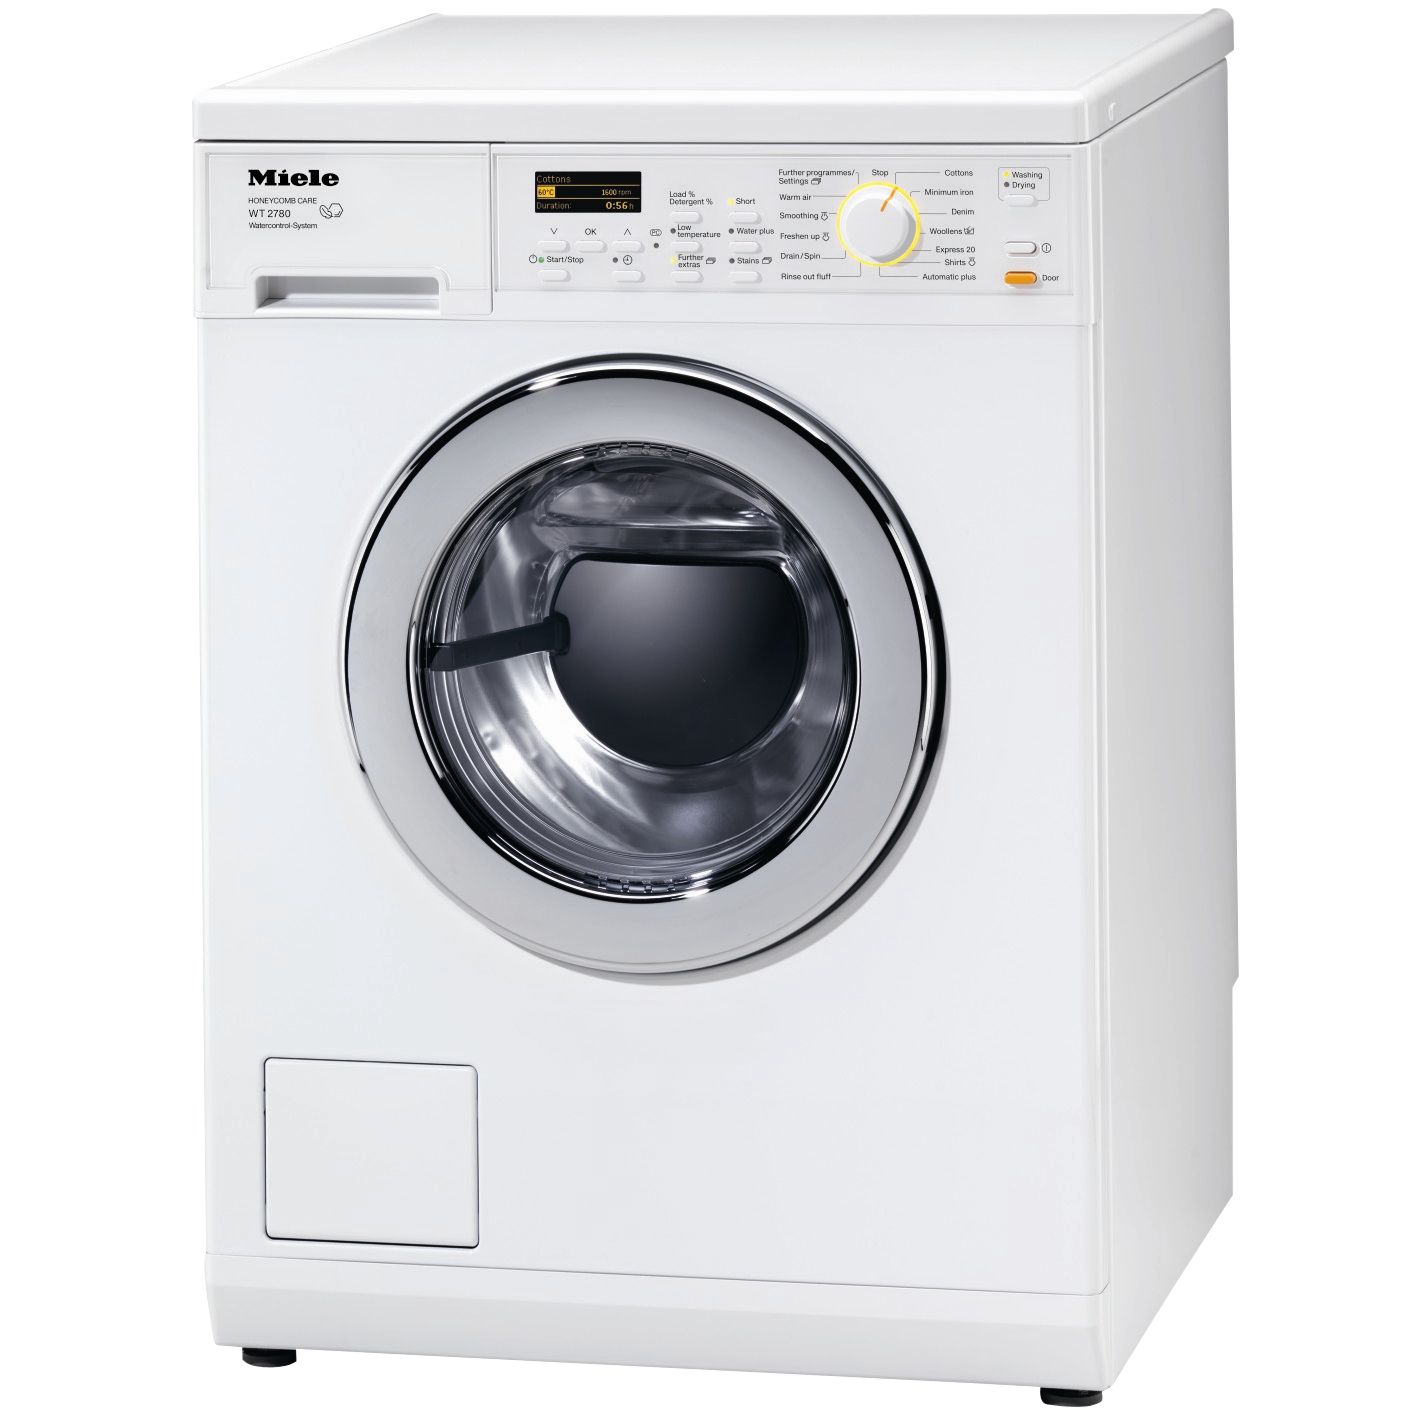 Miele WT2780 Washer Dryer, White at JohnLewis